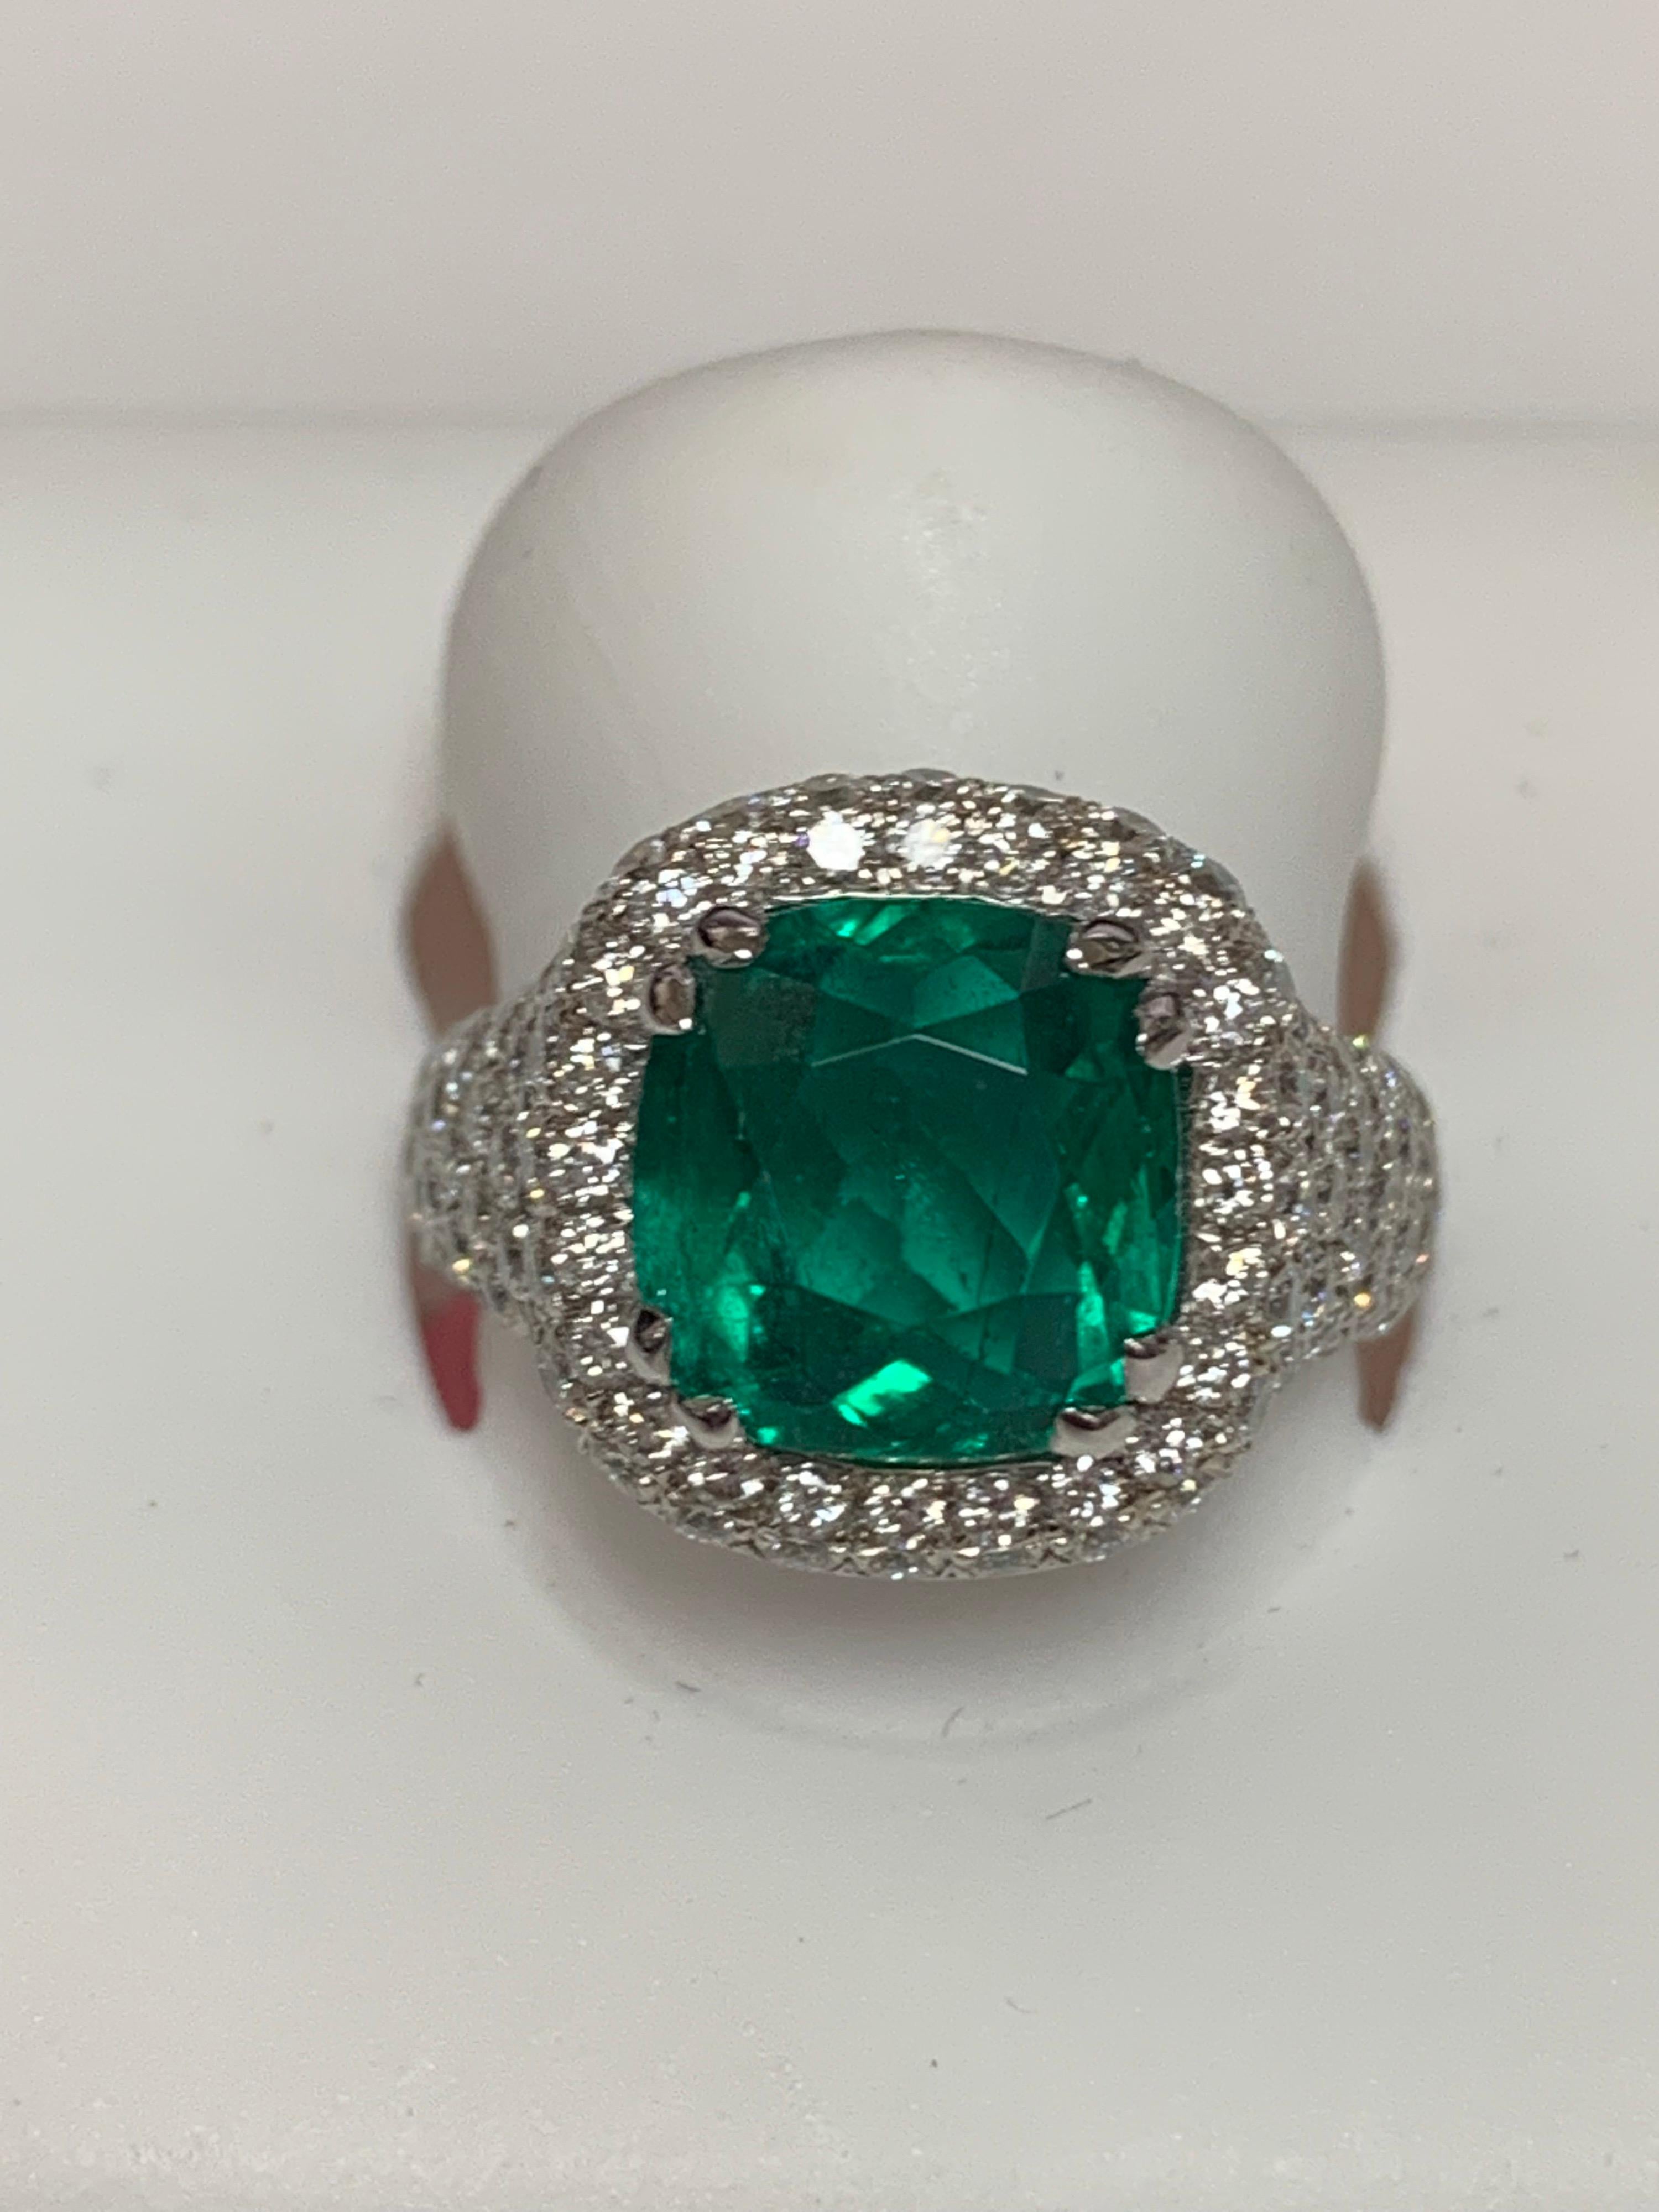 Natural 4.32 Carat Cushion Emerald and round white diamonds 1.69 Carat set in 14 Karat gold is one of a kind hand crafted ring, The size of the ring is 7 and can be resized if needed.